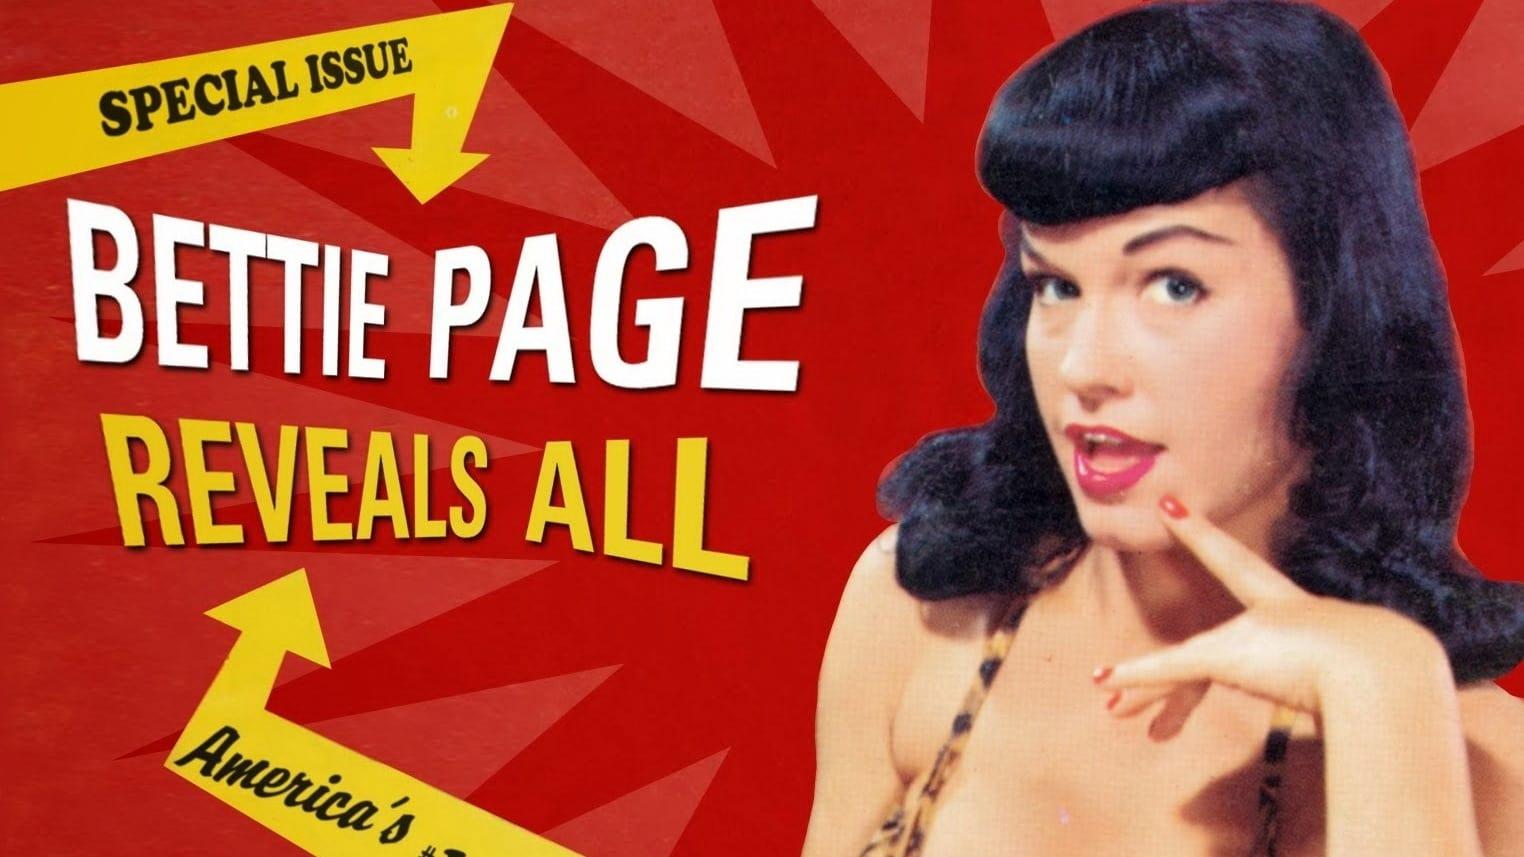 Bettie Page Reveals All backdrop